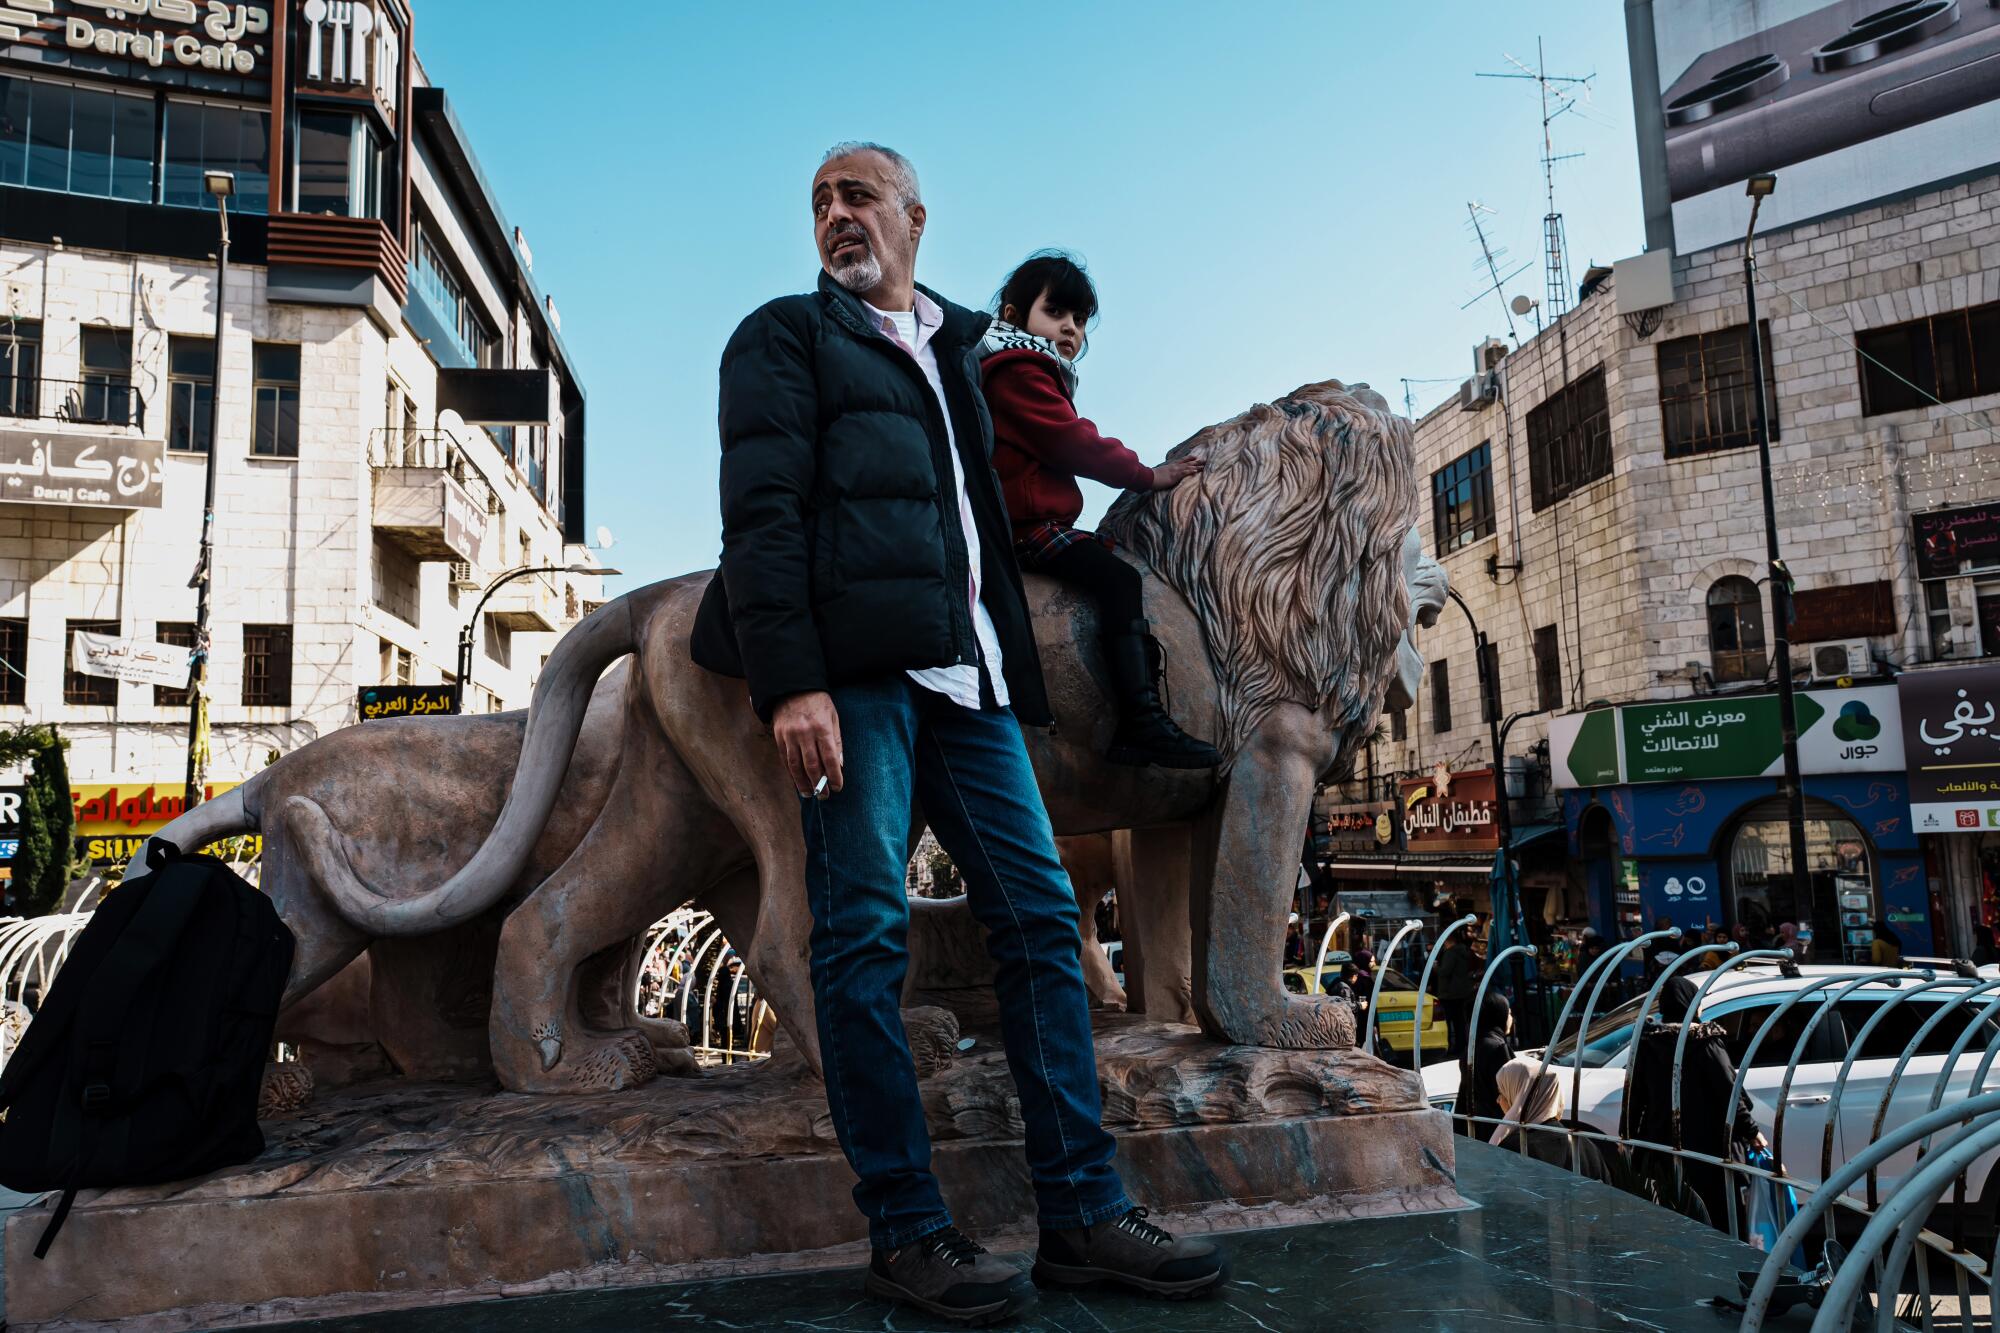 Mohammad Al Farra is with his daughter, sitting on a lion statue. 